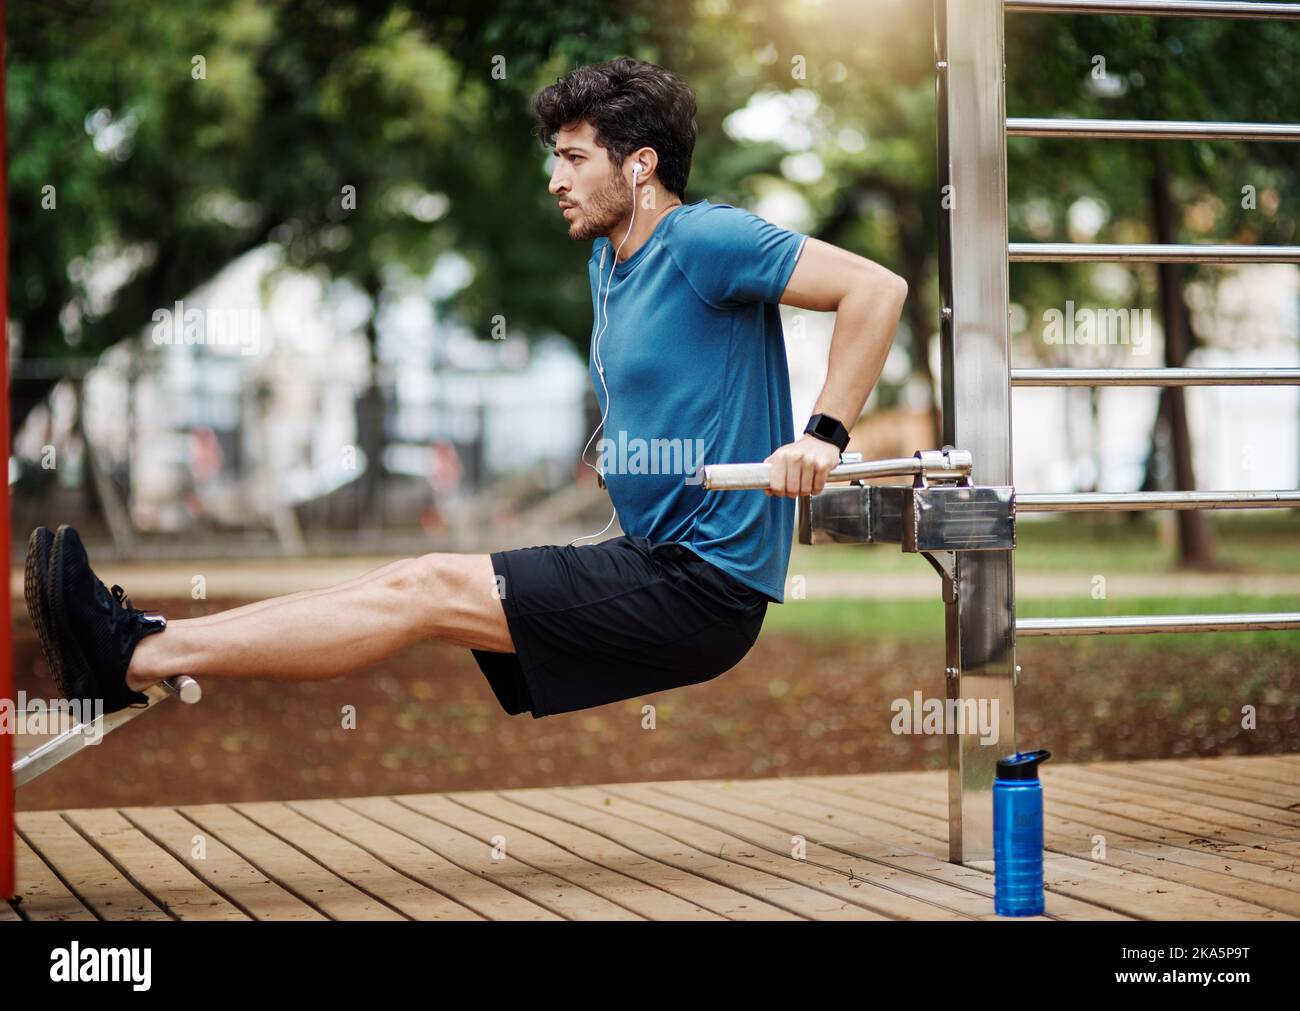 Focus on your breathing. a sporty young man doing stretching techniques while exercising outdoors. Stock Photo